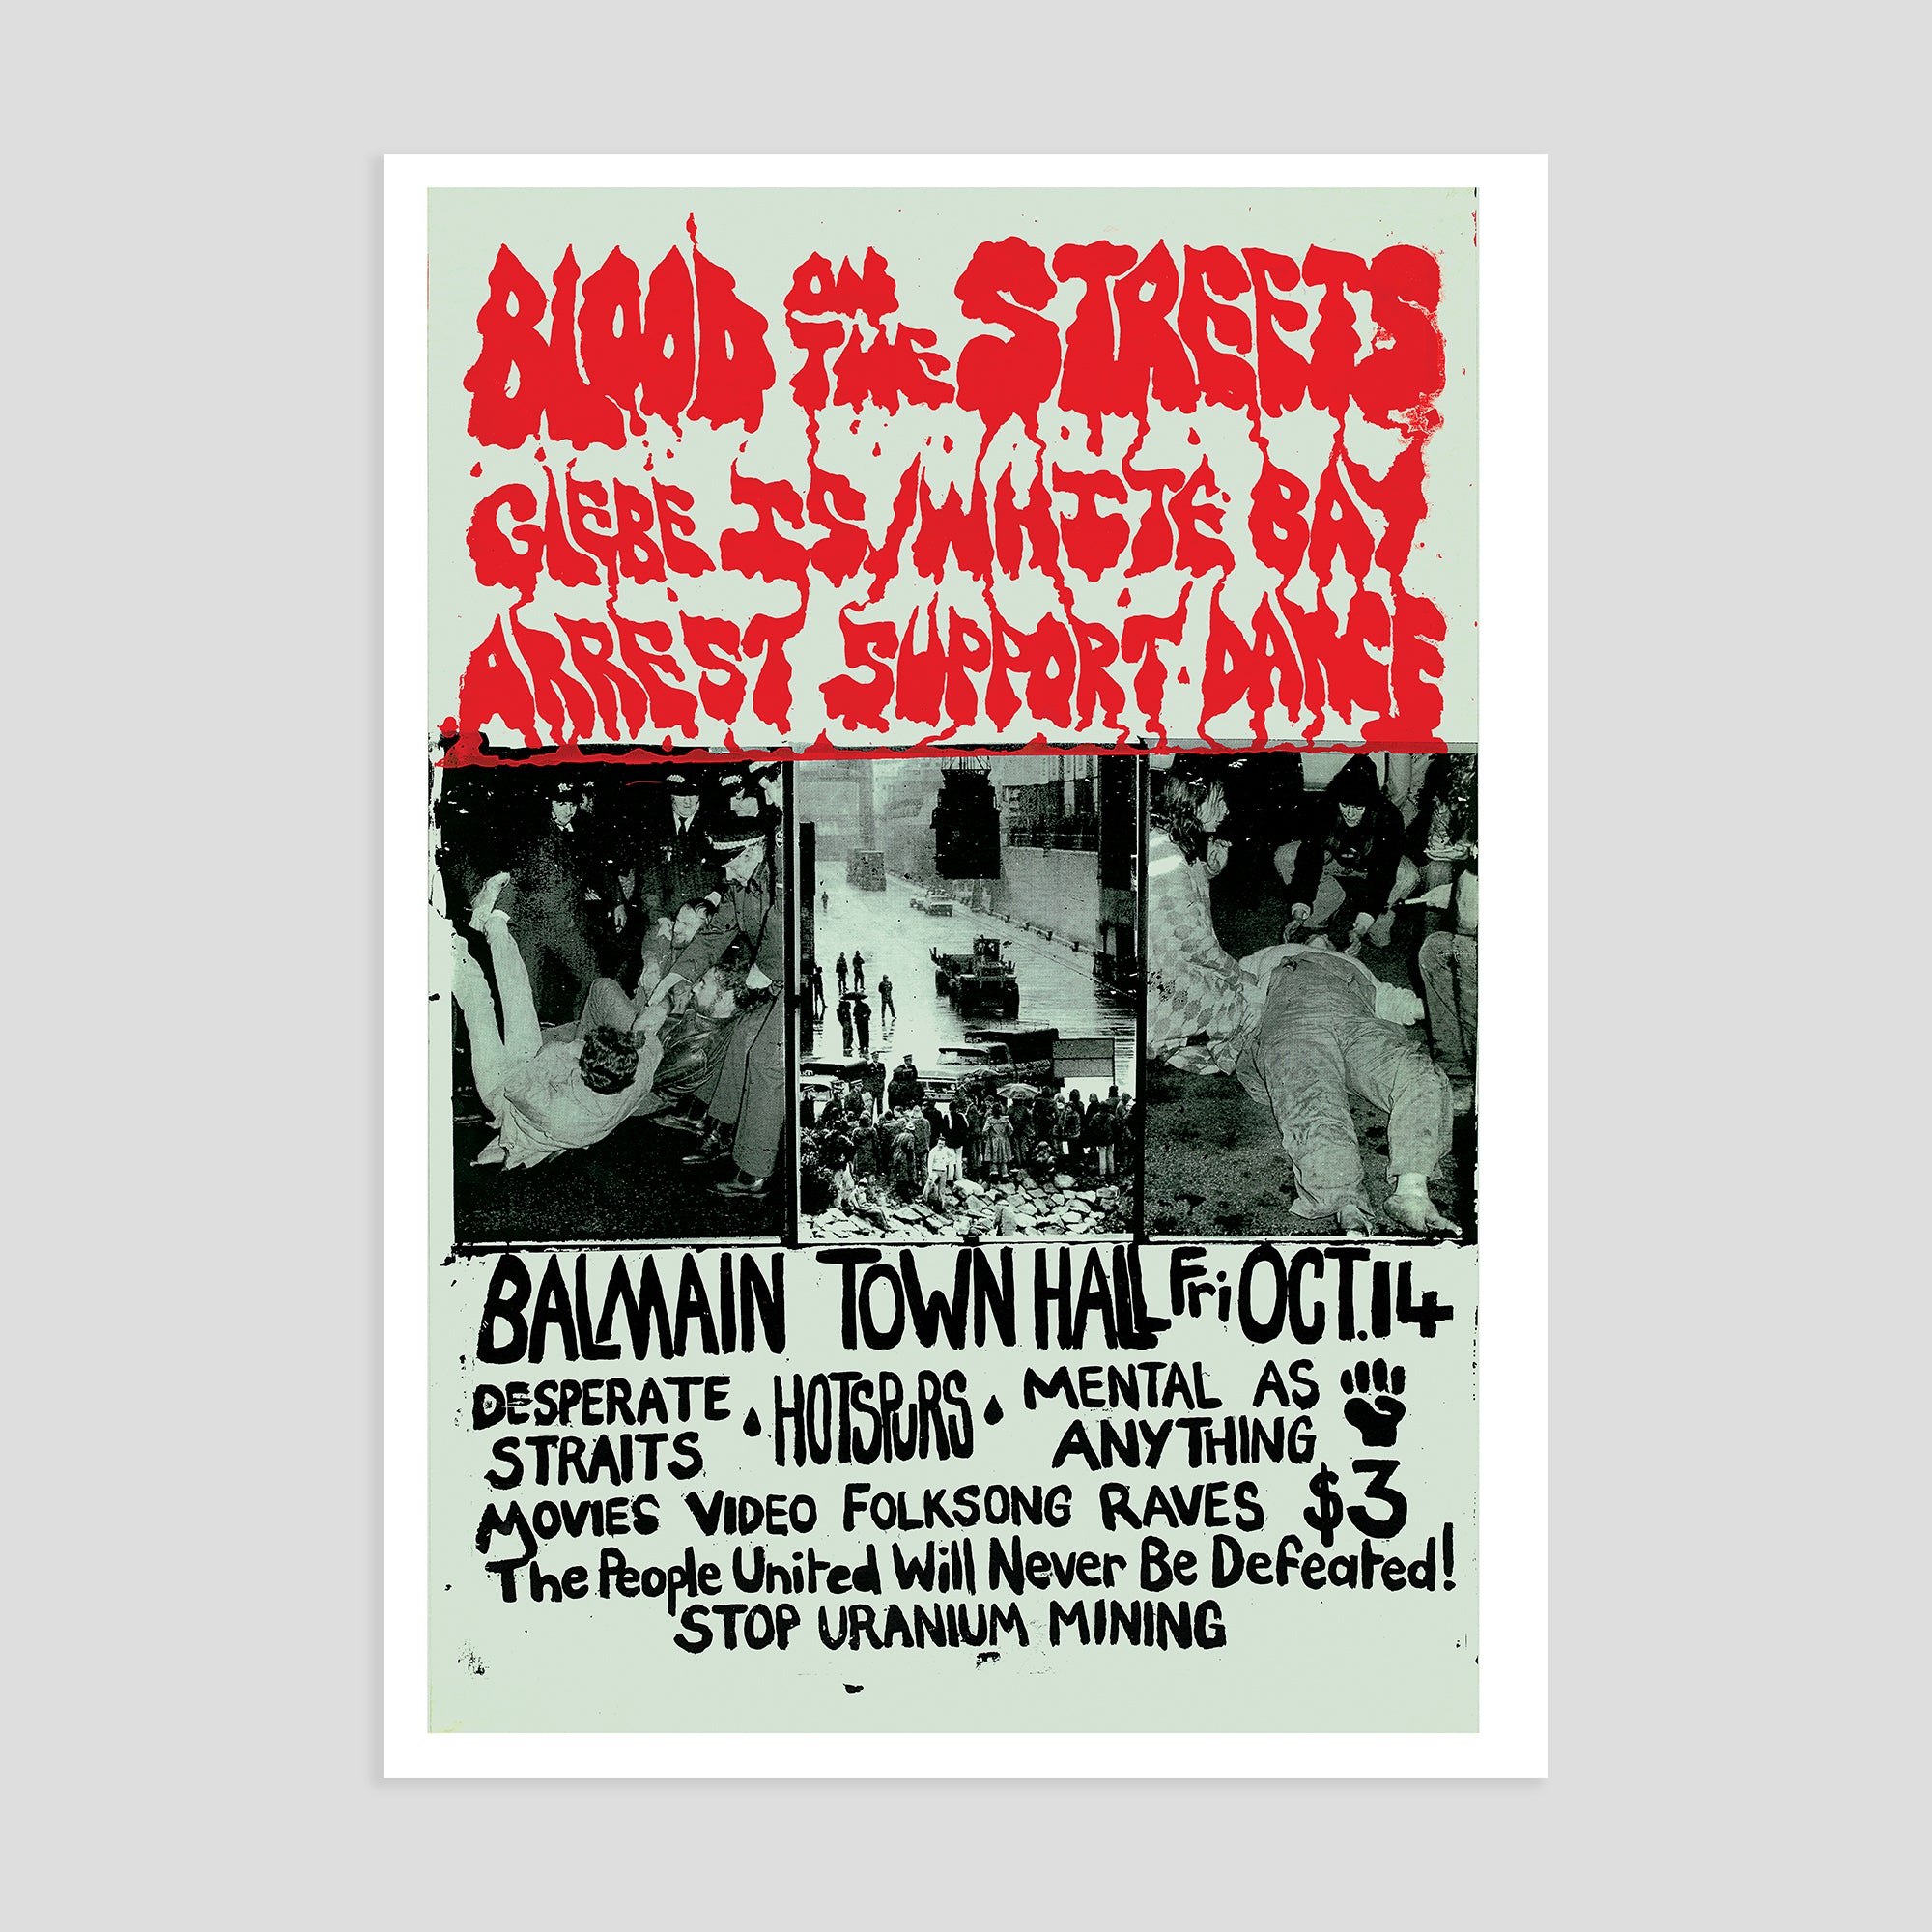 TOBY ZOATES 'BLOOD ON THE STREETS' 1977 - PRINT